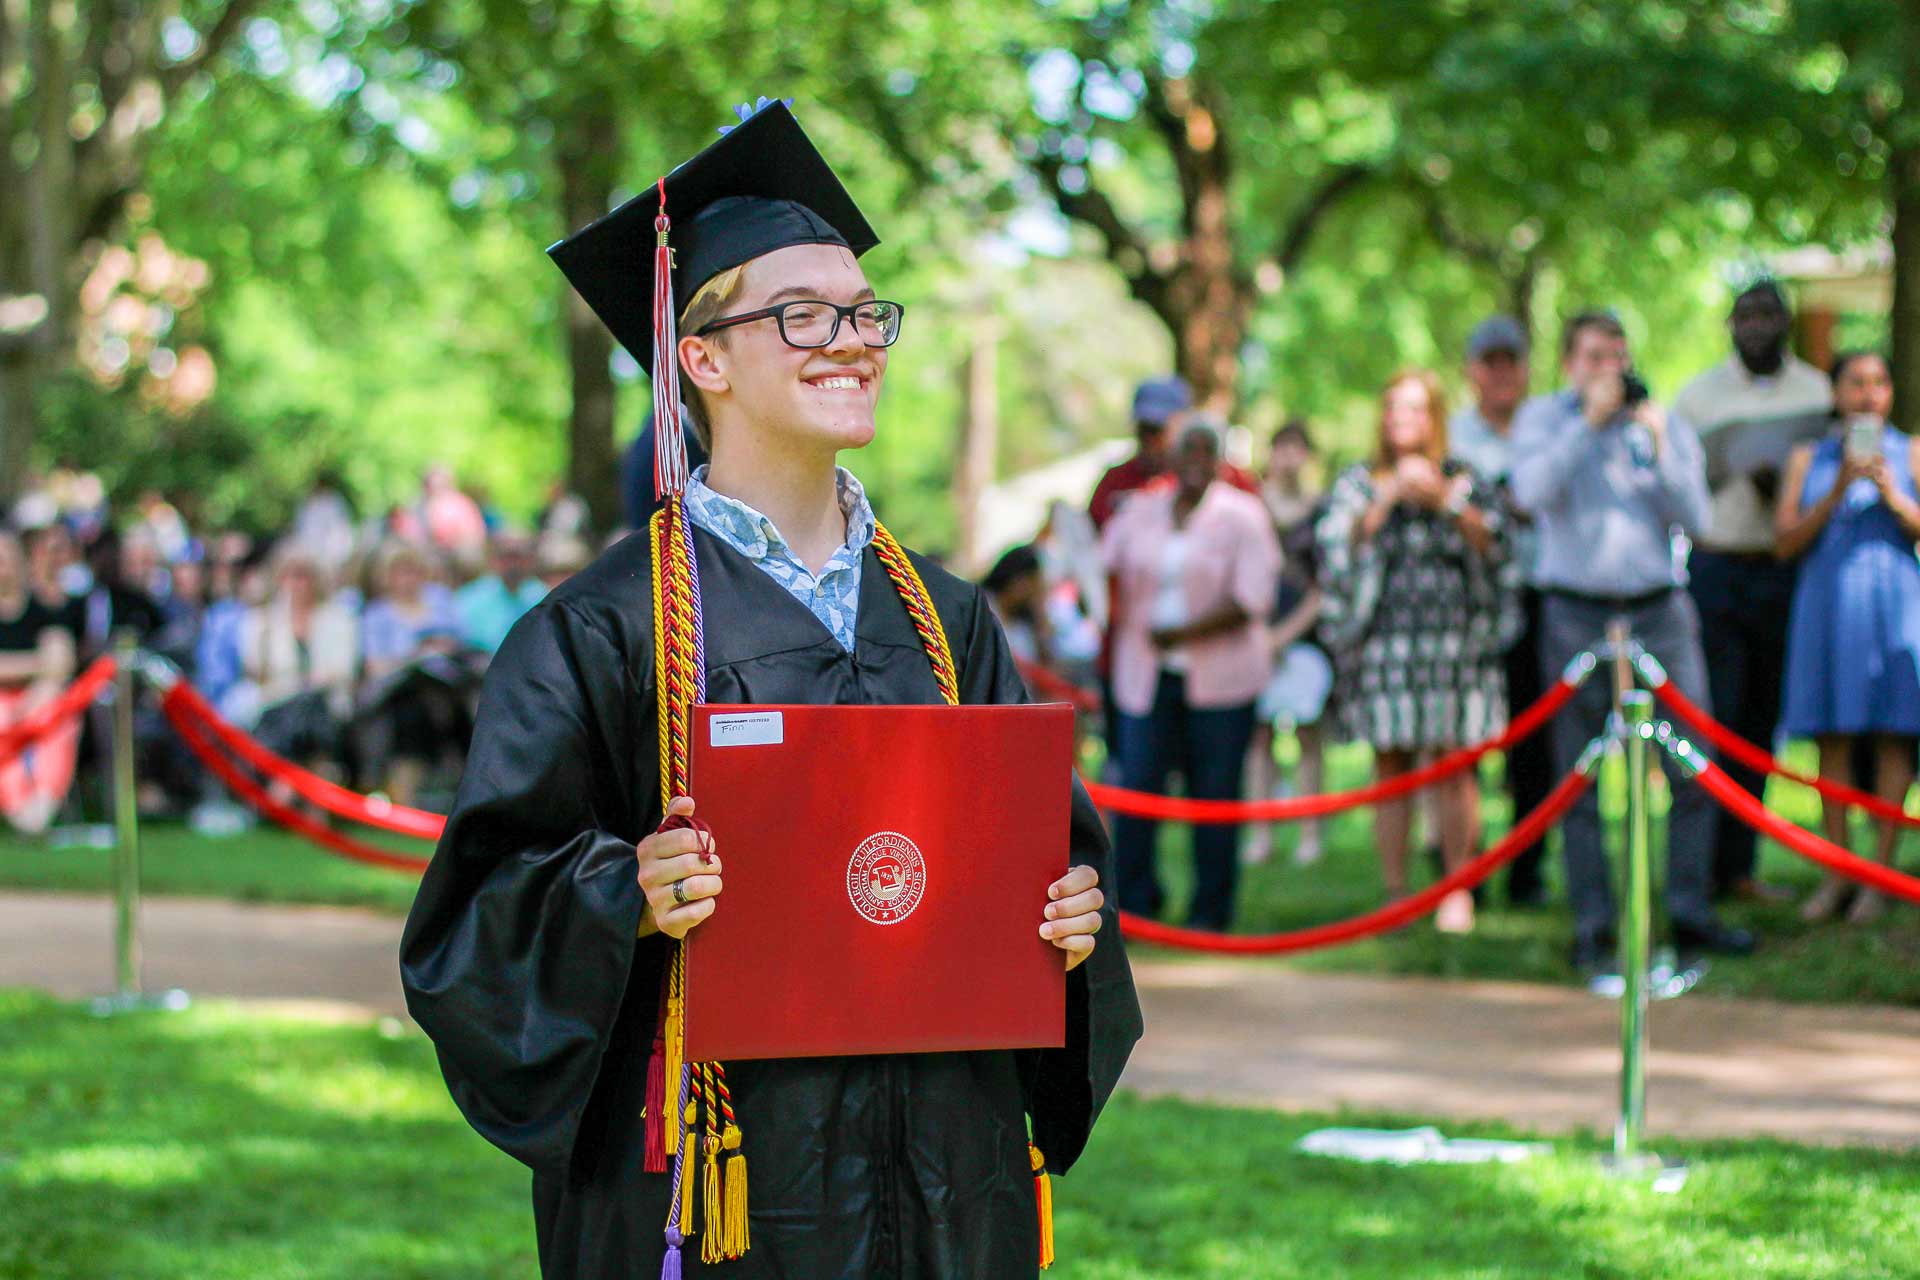 A student celebrates after receiving their diploma.